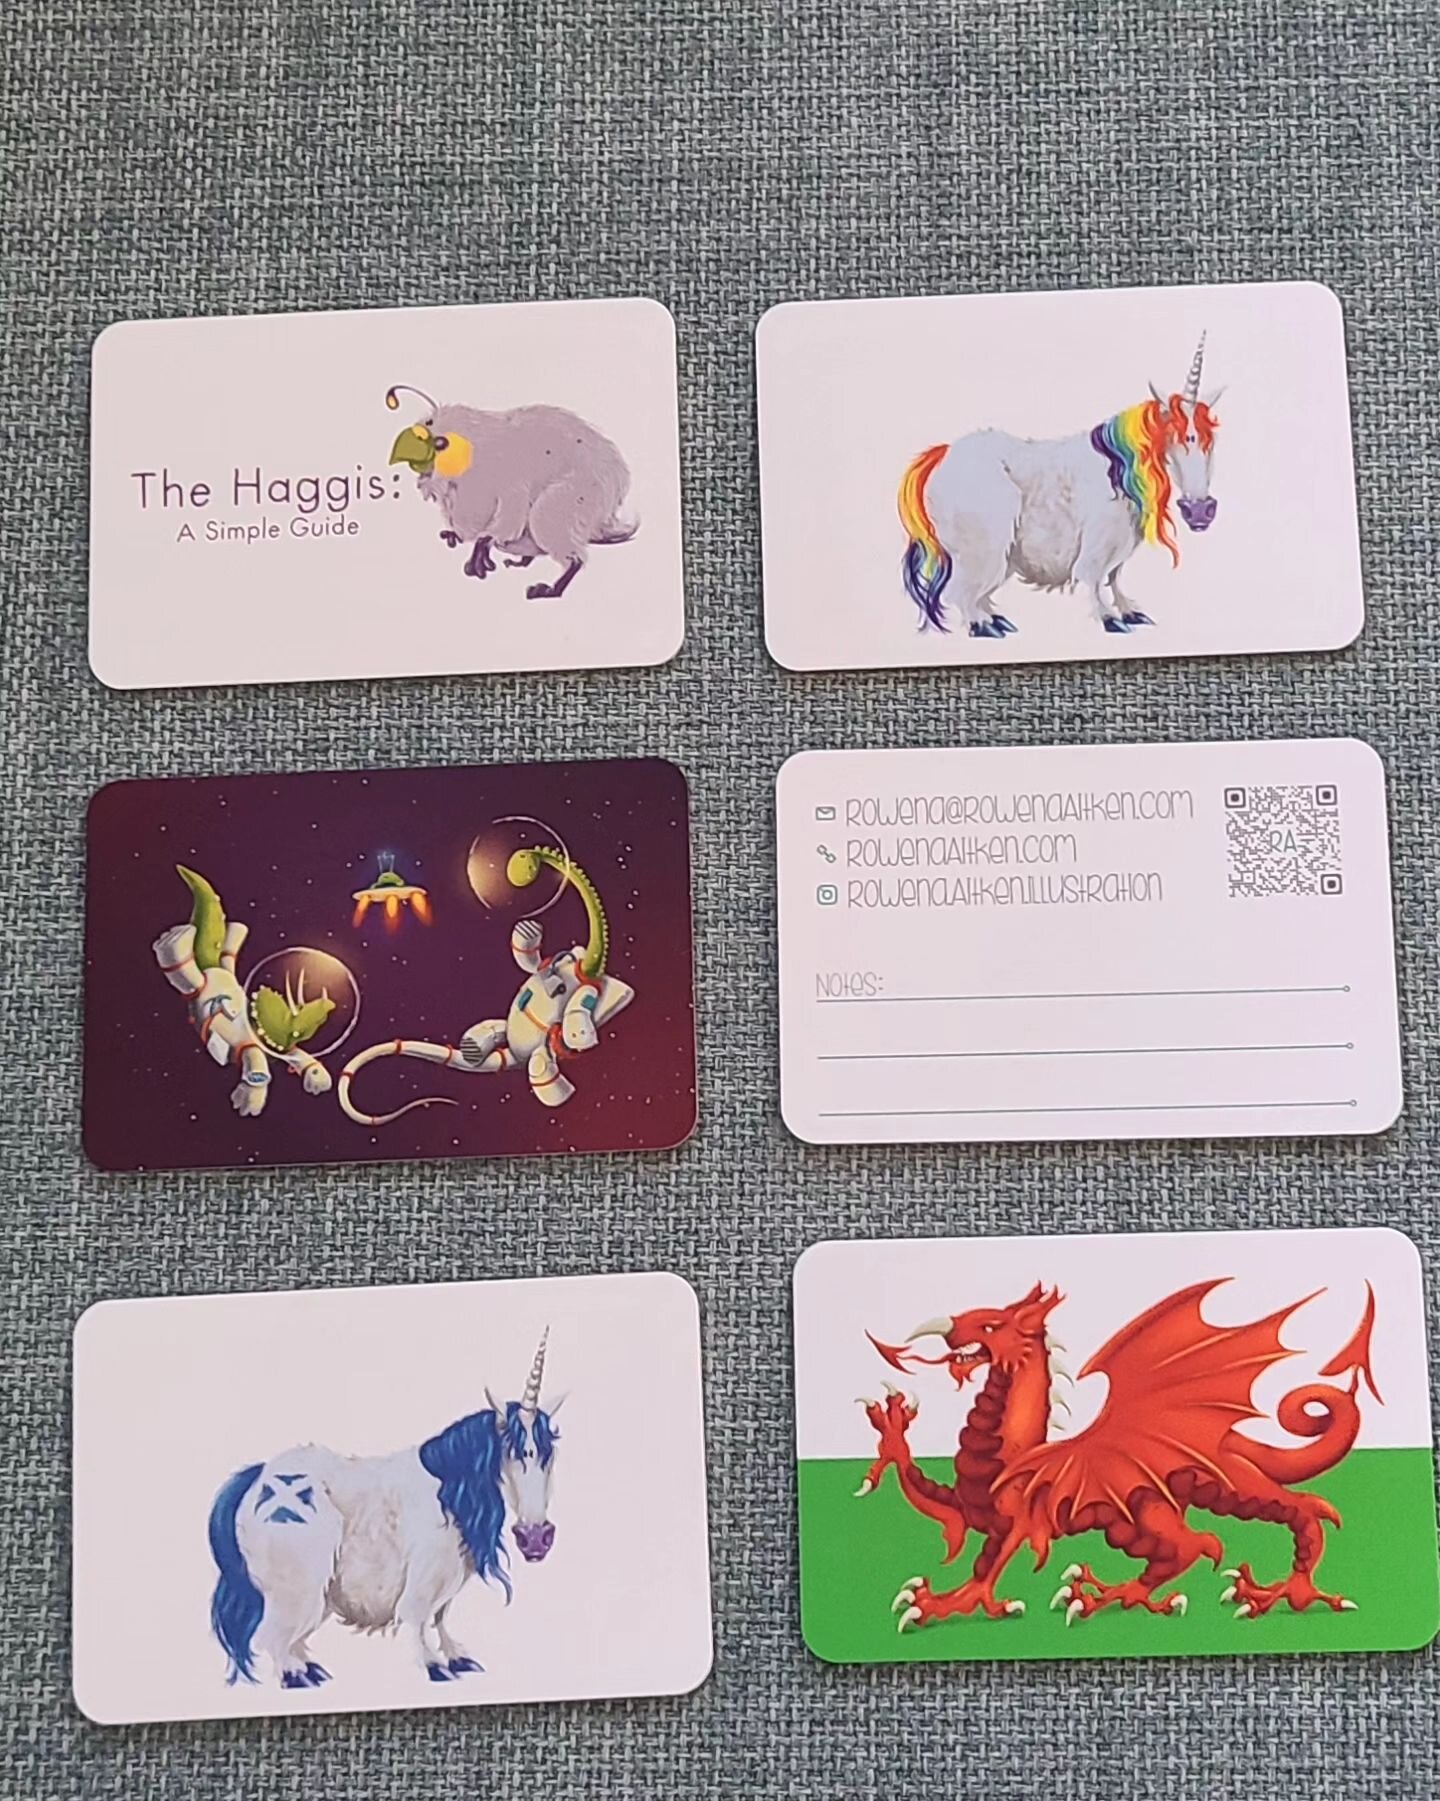 New business cards from @moo! The backs have my details along with a QR code which links to my website. Always very happy with the quality!

Use my link to get 25% off your first order! https://refer.moo.com/s/rowena2

#illustration #illustrator #moo